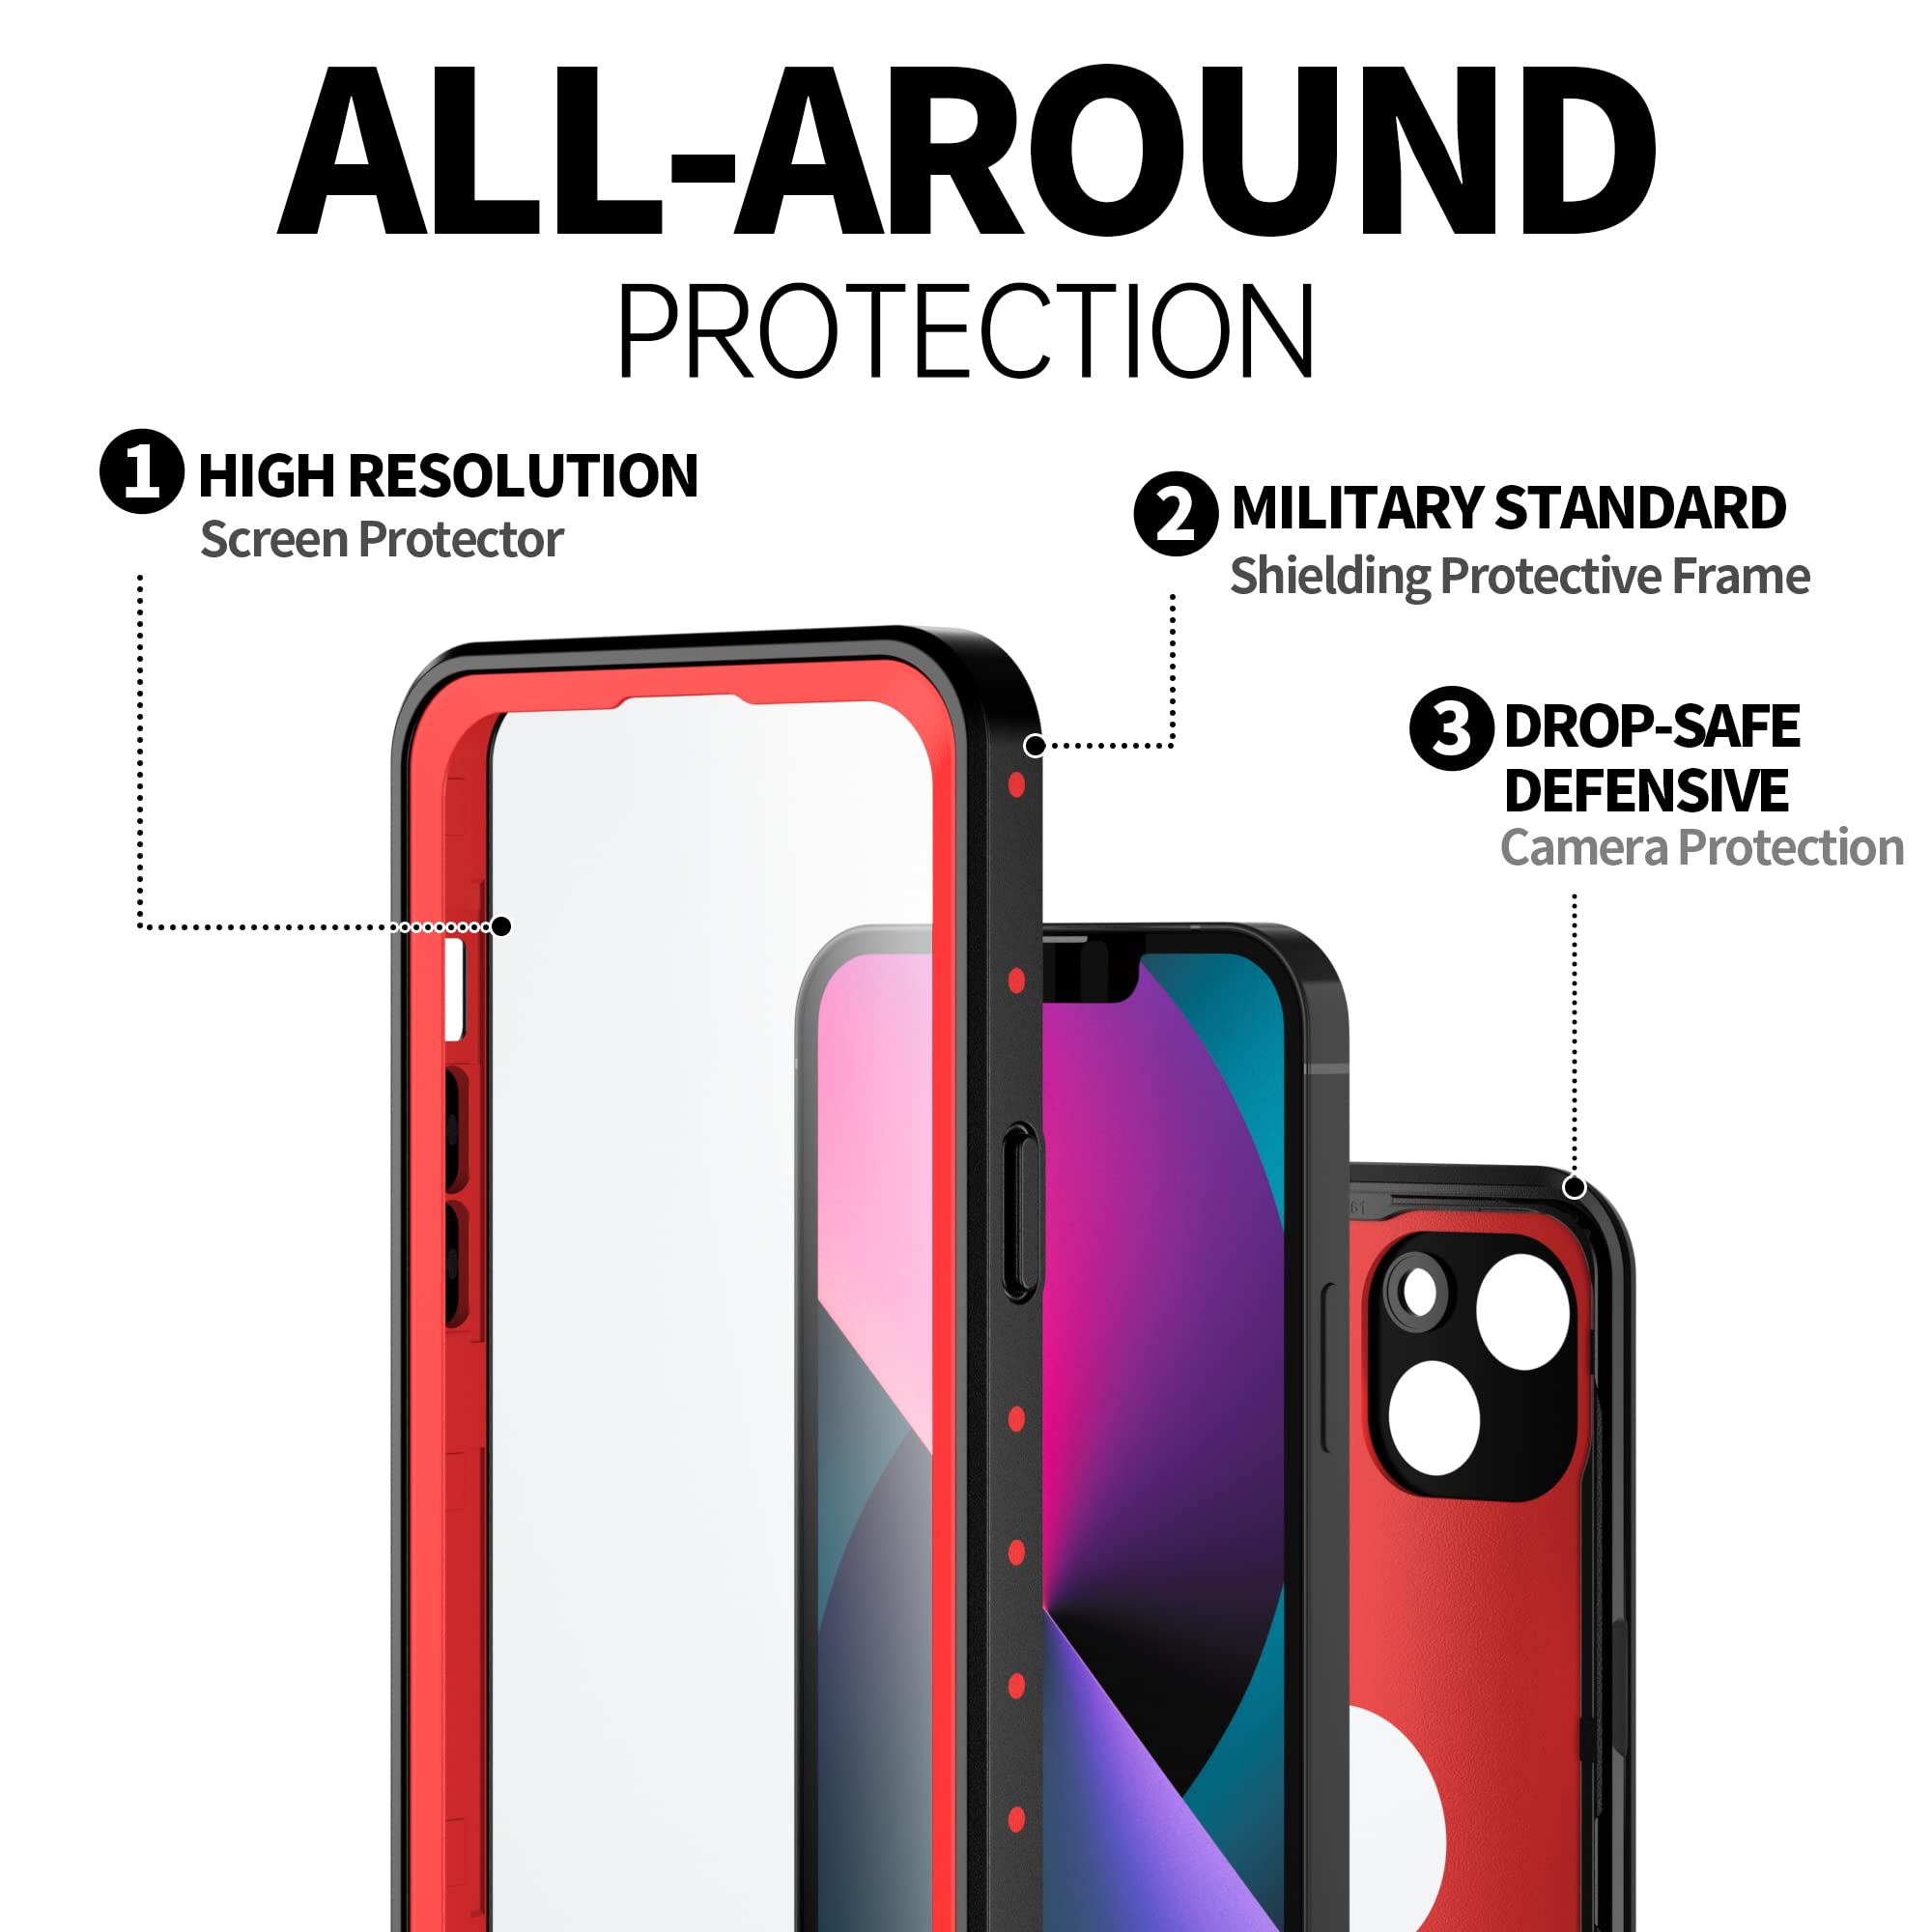 for Apple iPhone 13 Mini Waterproof Case, BEASTEK NRE Series, Shockproof Underwater IP68 Case, with Built-in Screen Protector Full Body Rugged Protective Cover, for iPhone 13 Mini 5.4 inch (Red)